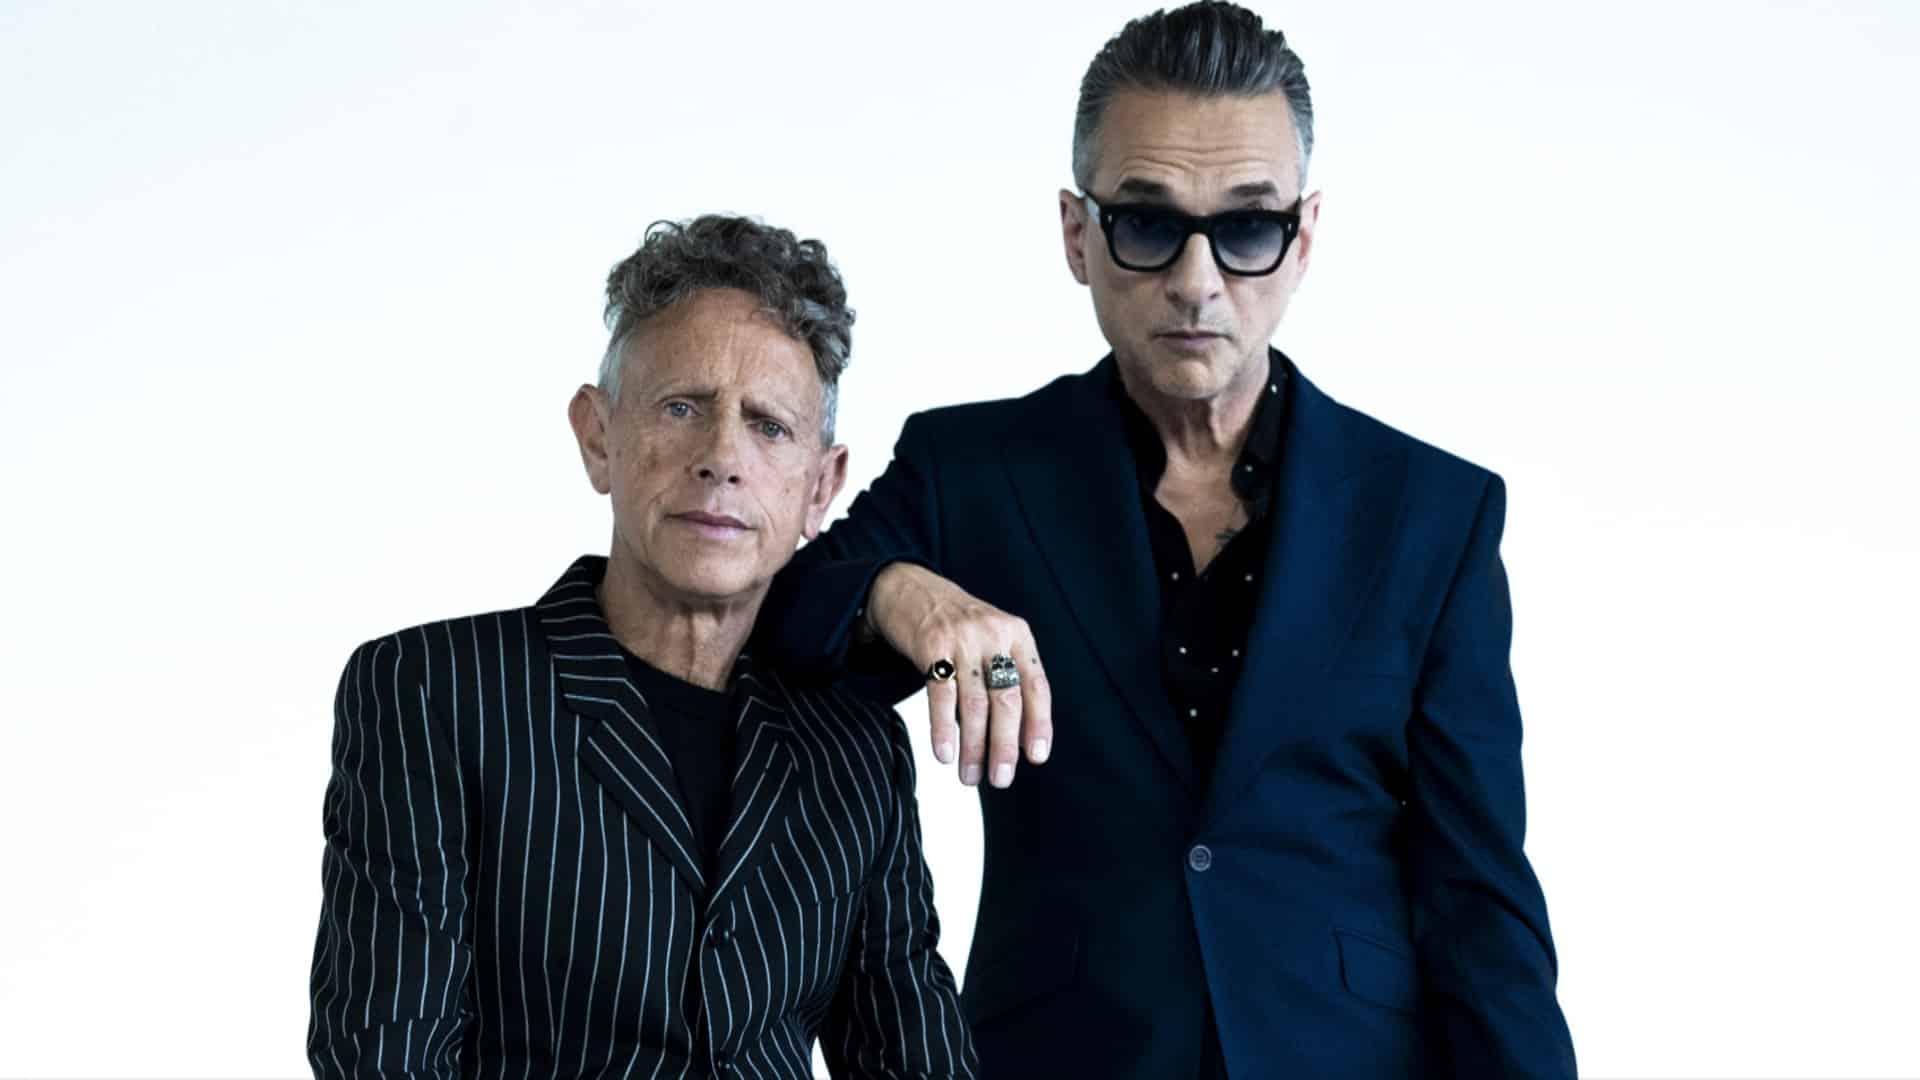 Depeche Mode reflect on life after losing Andy Fletcher